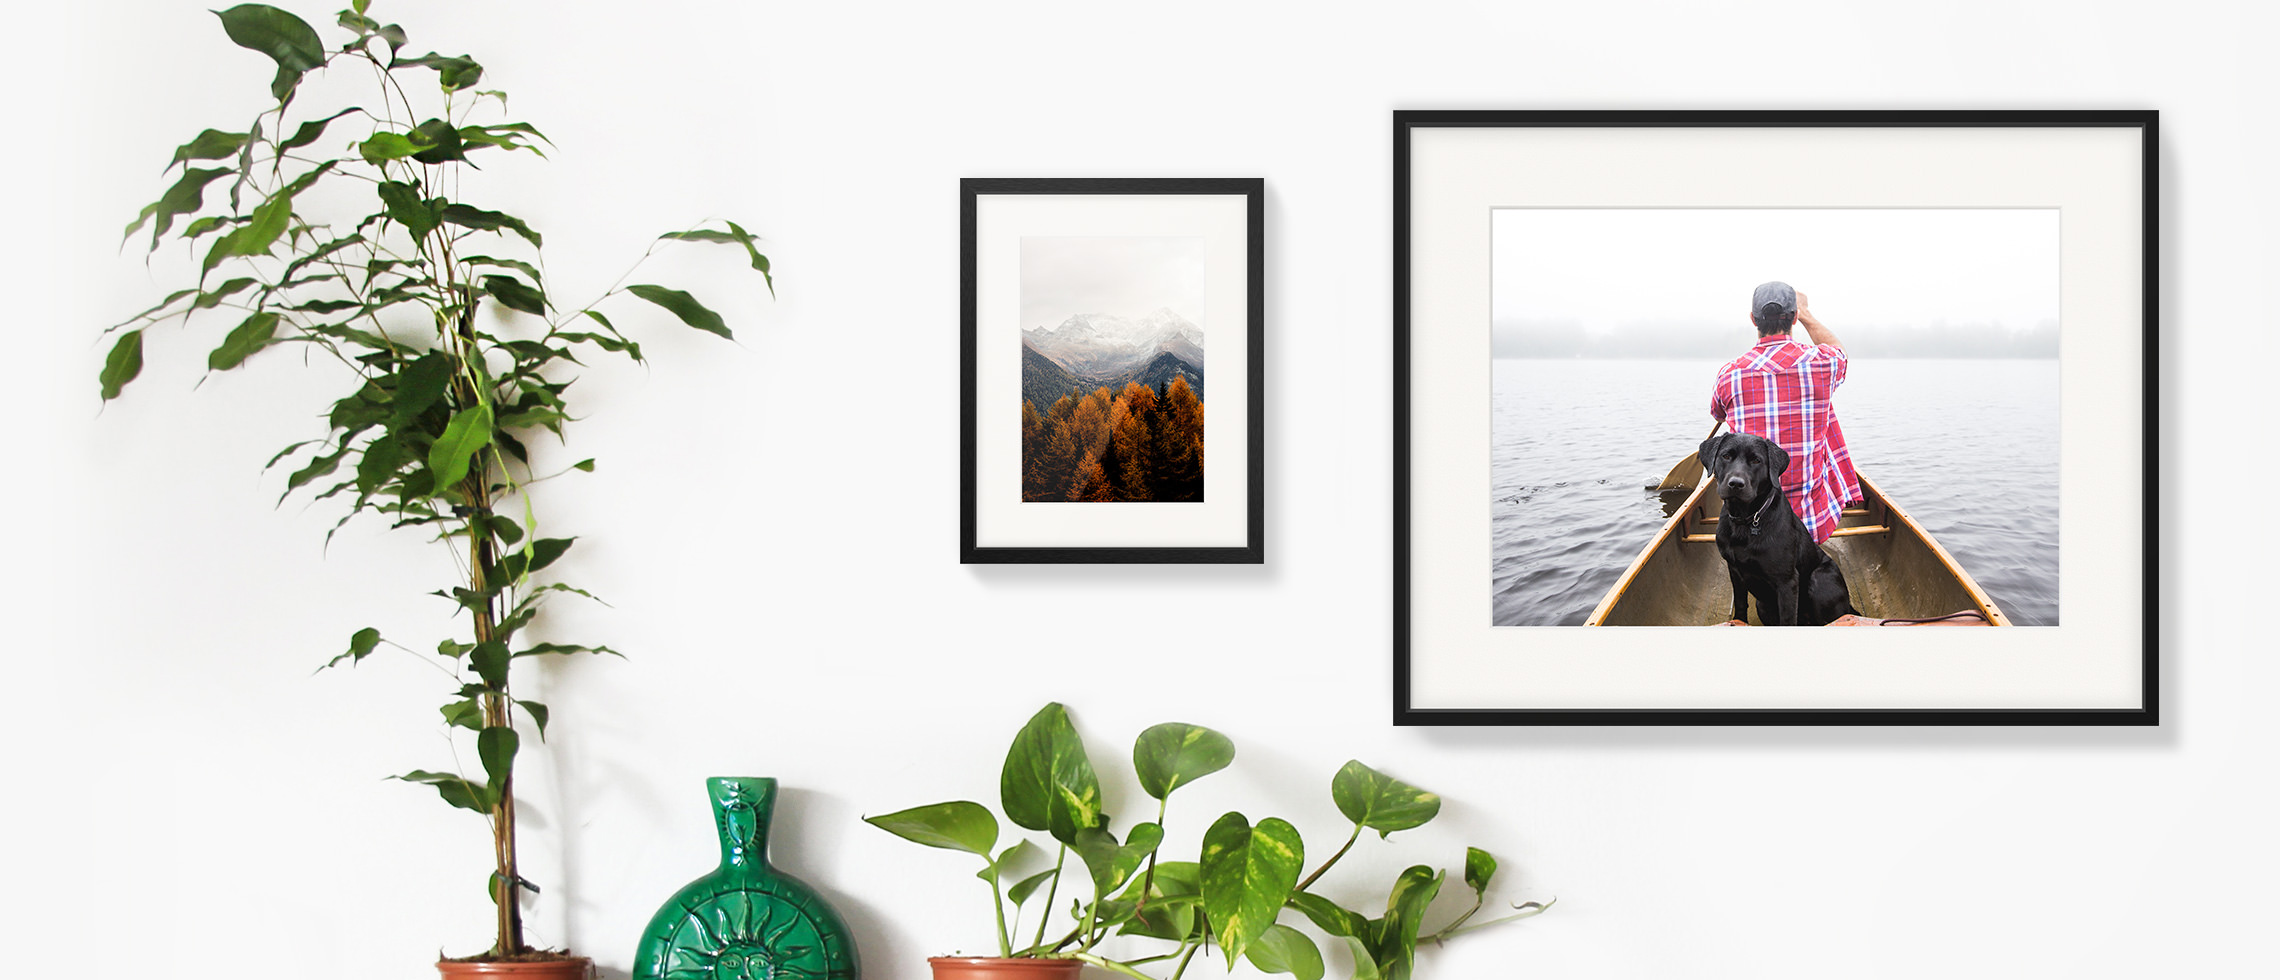 Two gallery frames hanging on a wall with a plant and vase on a shelf.